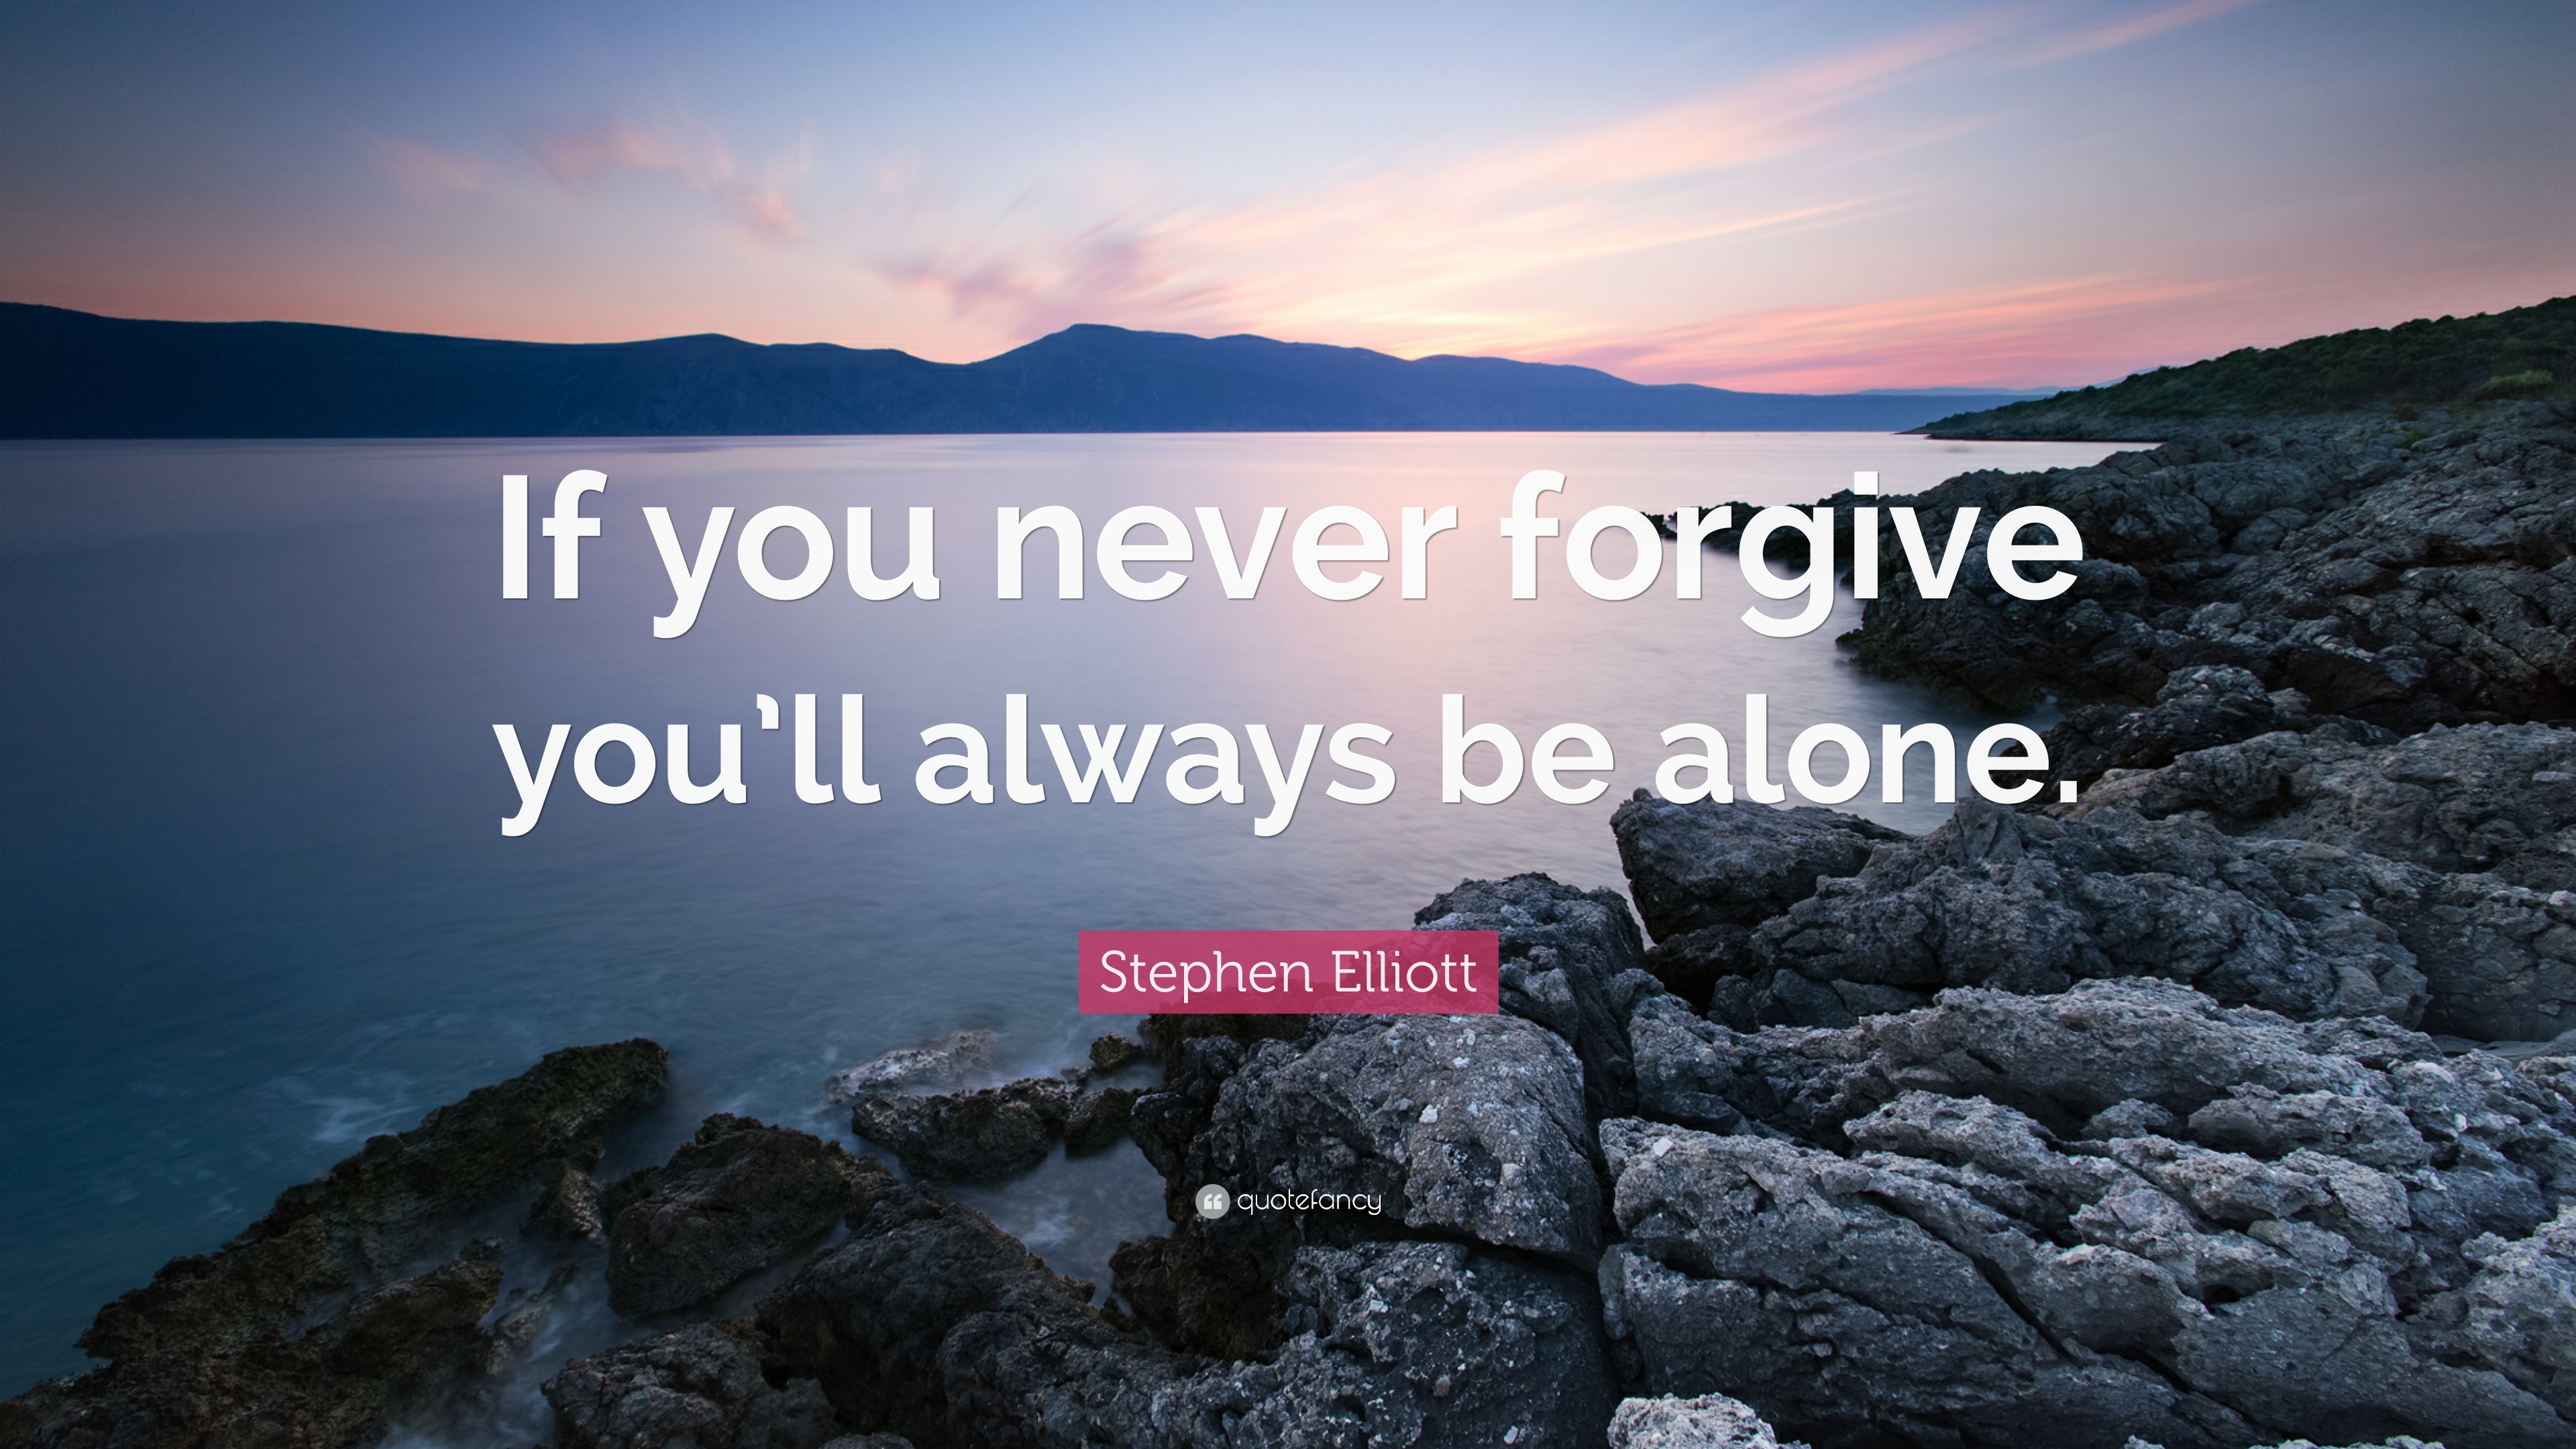 Stephen Elliott Quote: “If you never forgive you'll always be alone ...